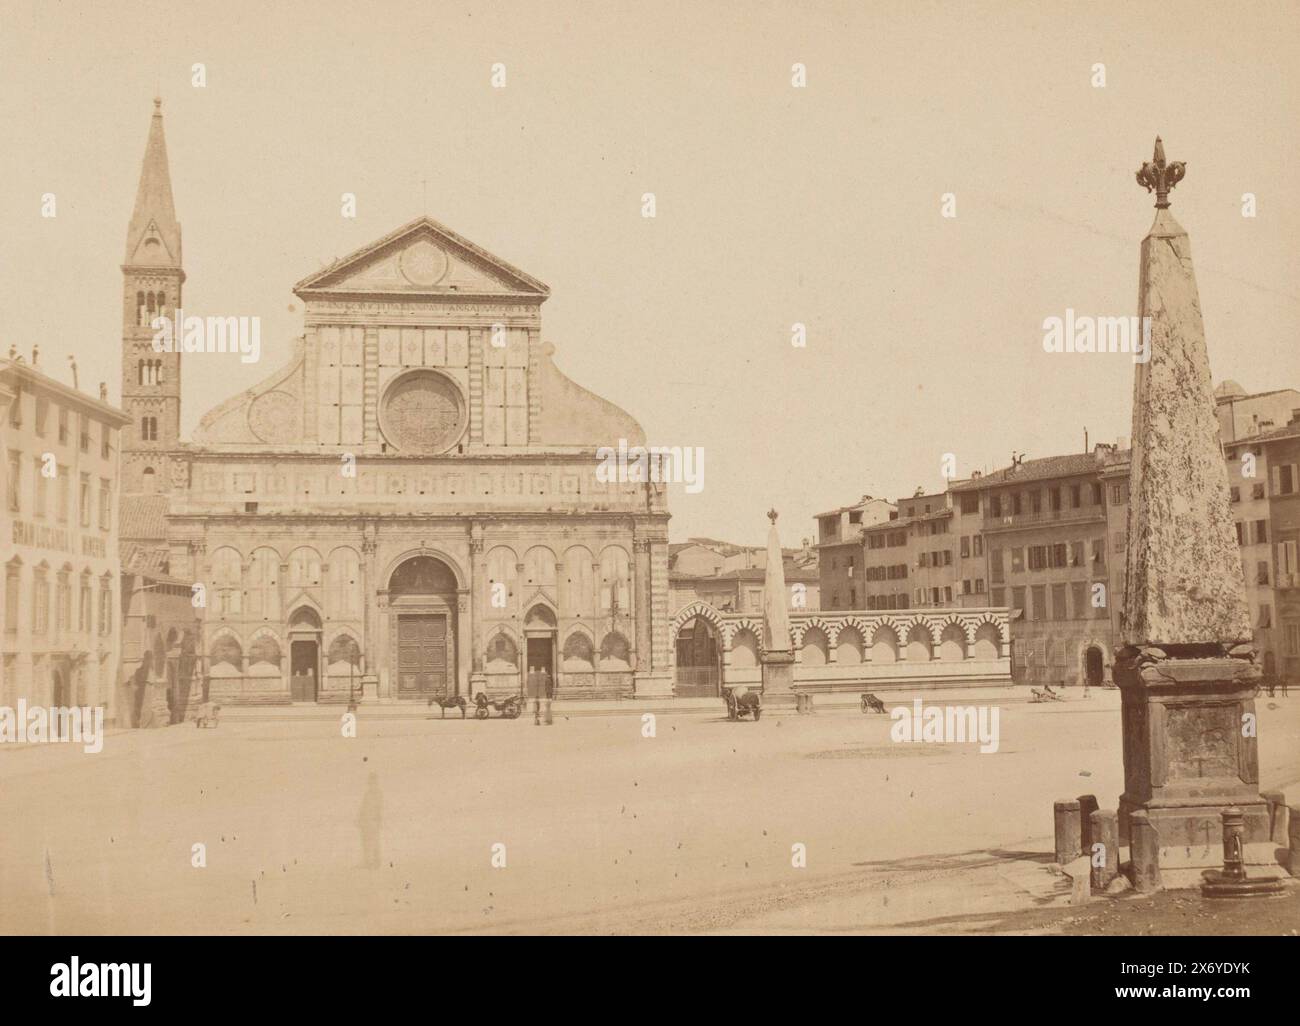 View of the Santa Maria Novella in Florence, Italy, S. Maria Novella (title on object), photograph, anonymous, after sculpture by: Bartolomeo Ammannati, after sculpture by: Giambologna, Florence, 1851 - 1900, cardboard, albumen print, height, 209 mm × width, 281 mm Stock Photo